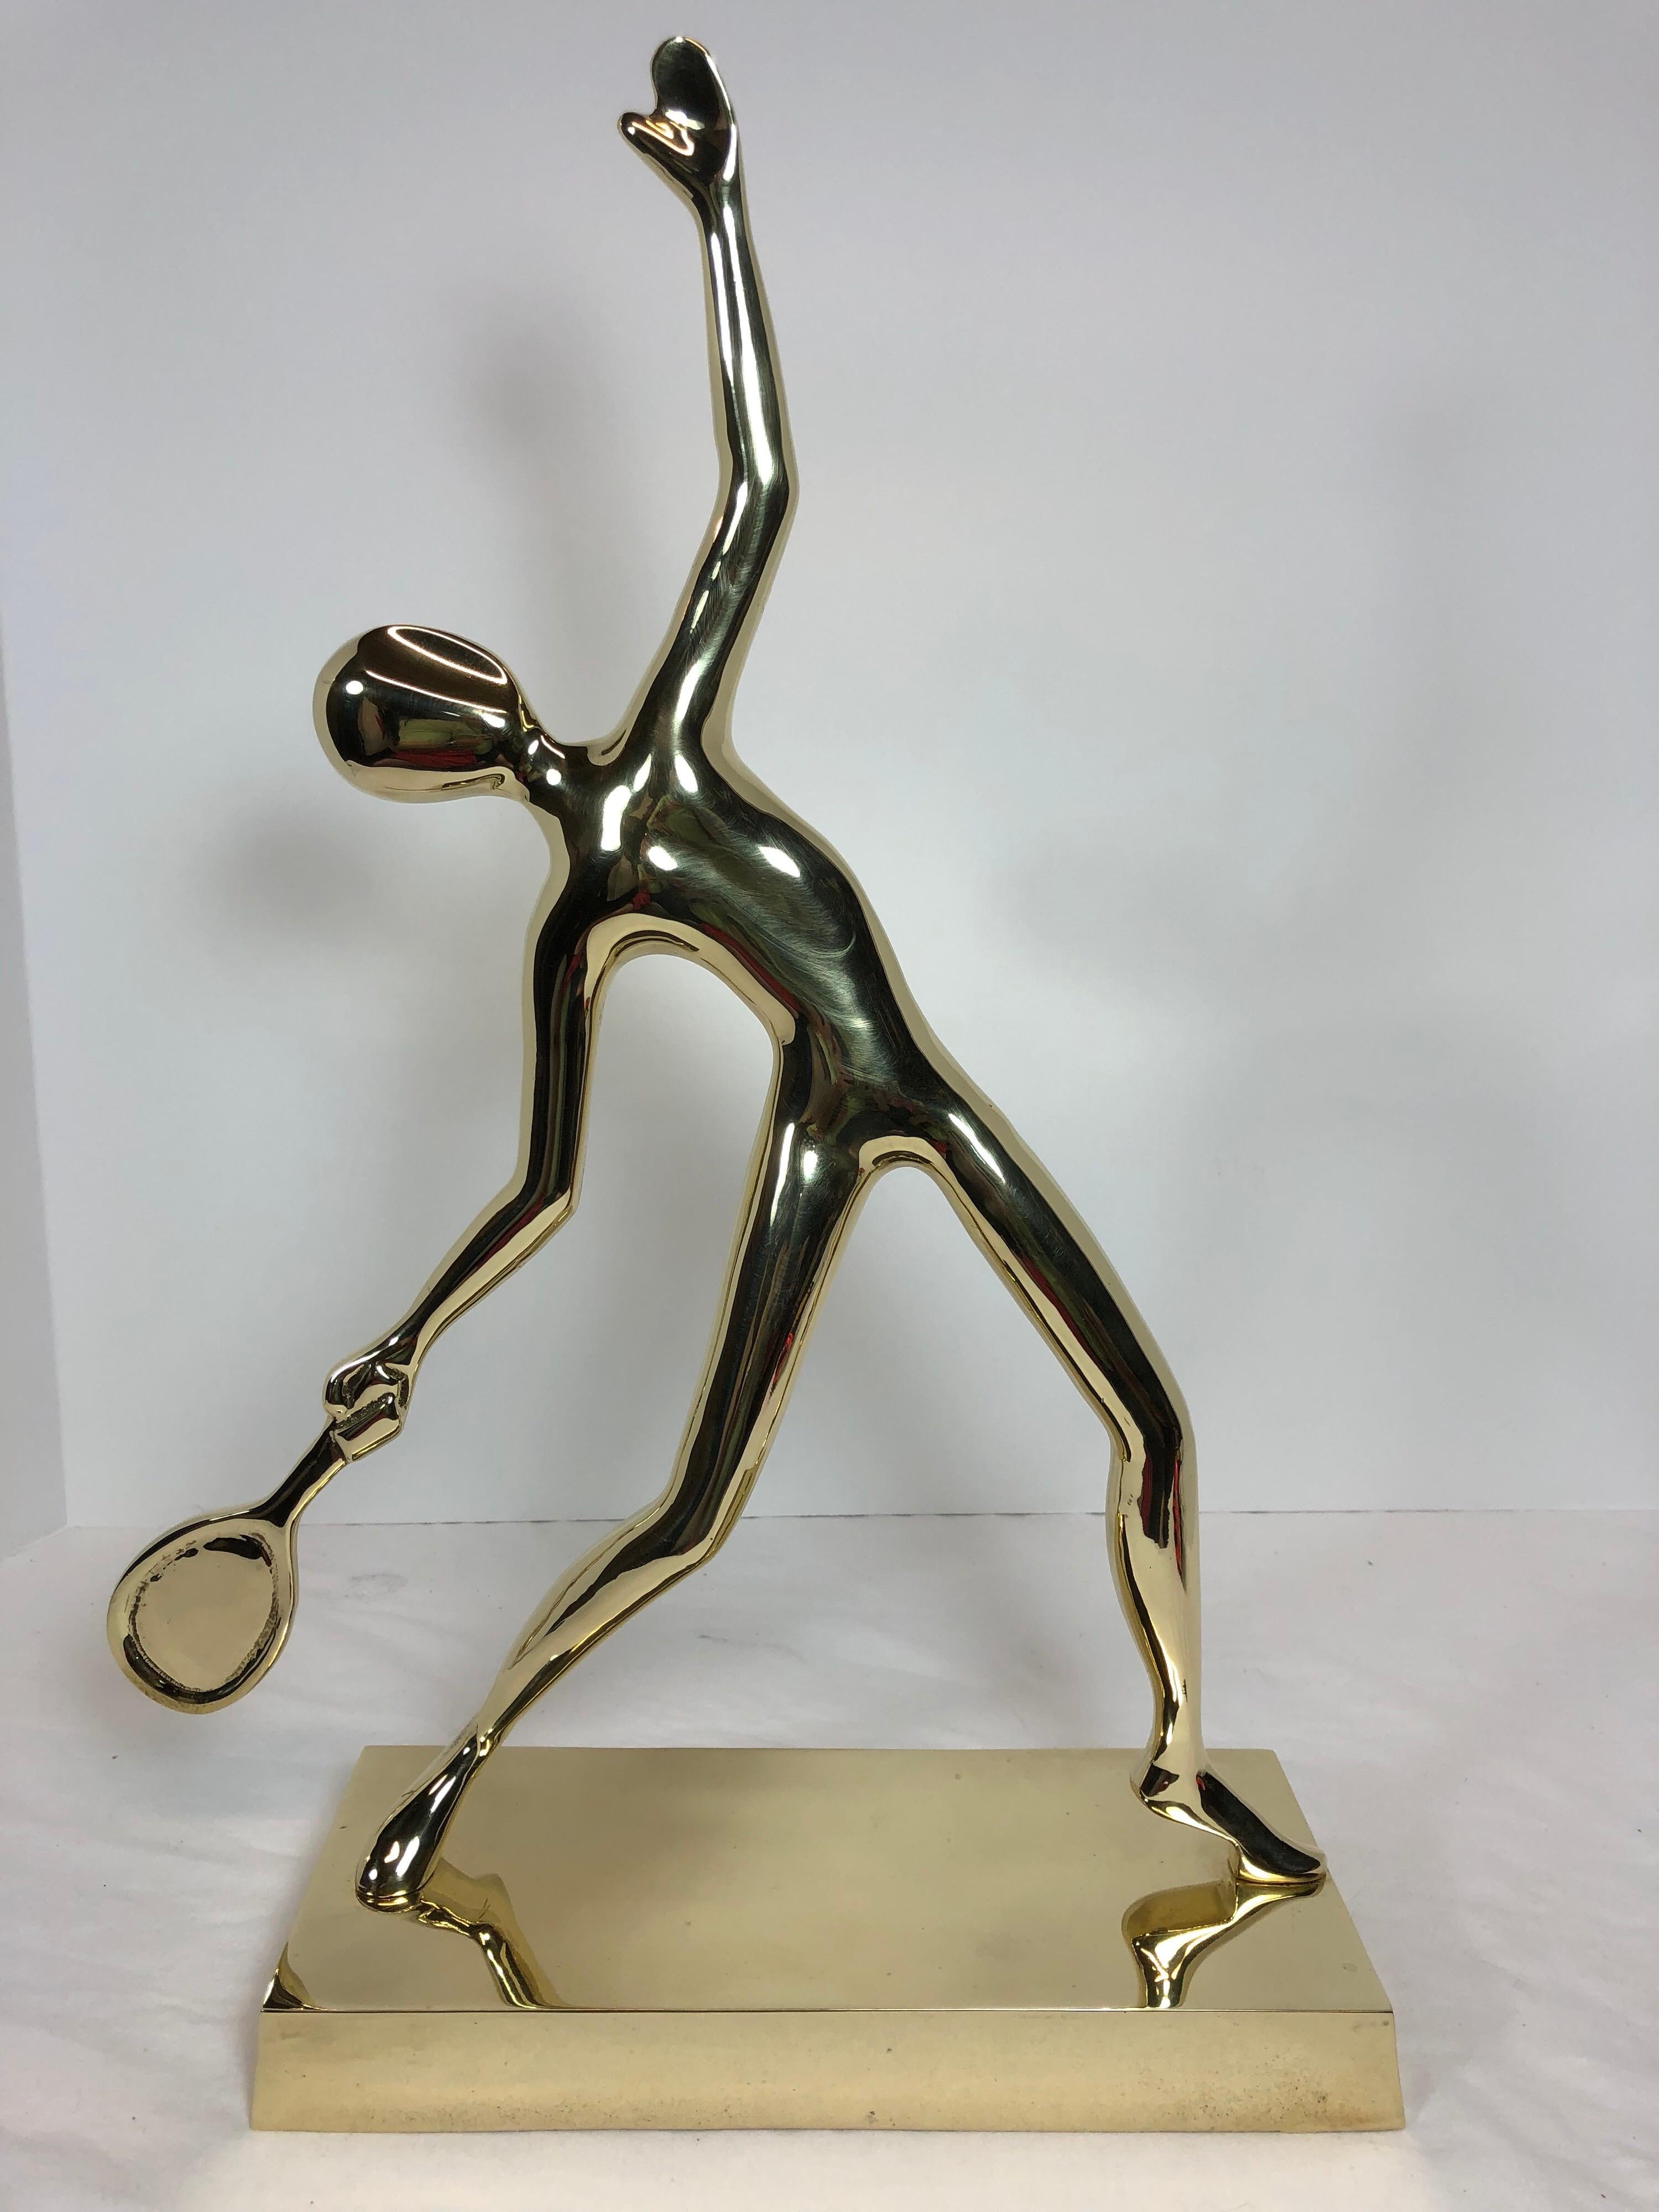 Very unique large polished solid brass abstract us open tennis player statue. Polished, ready to use.